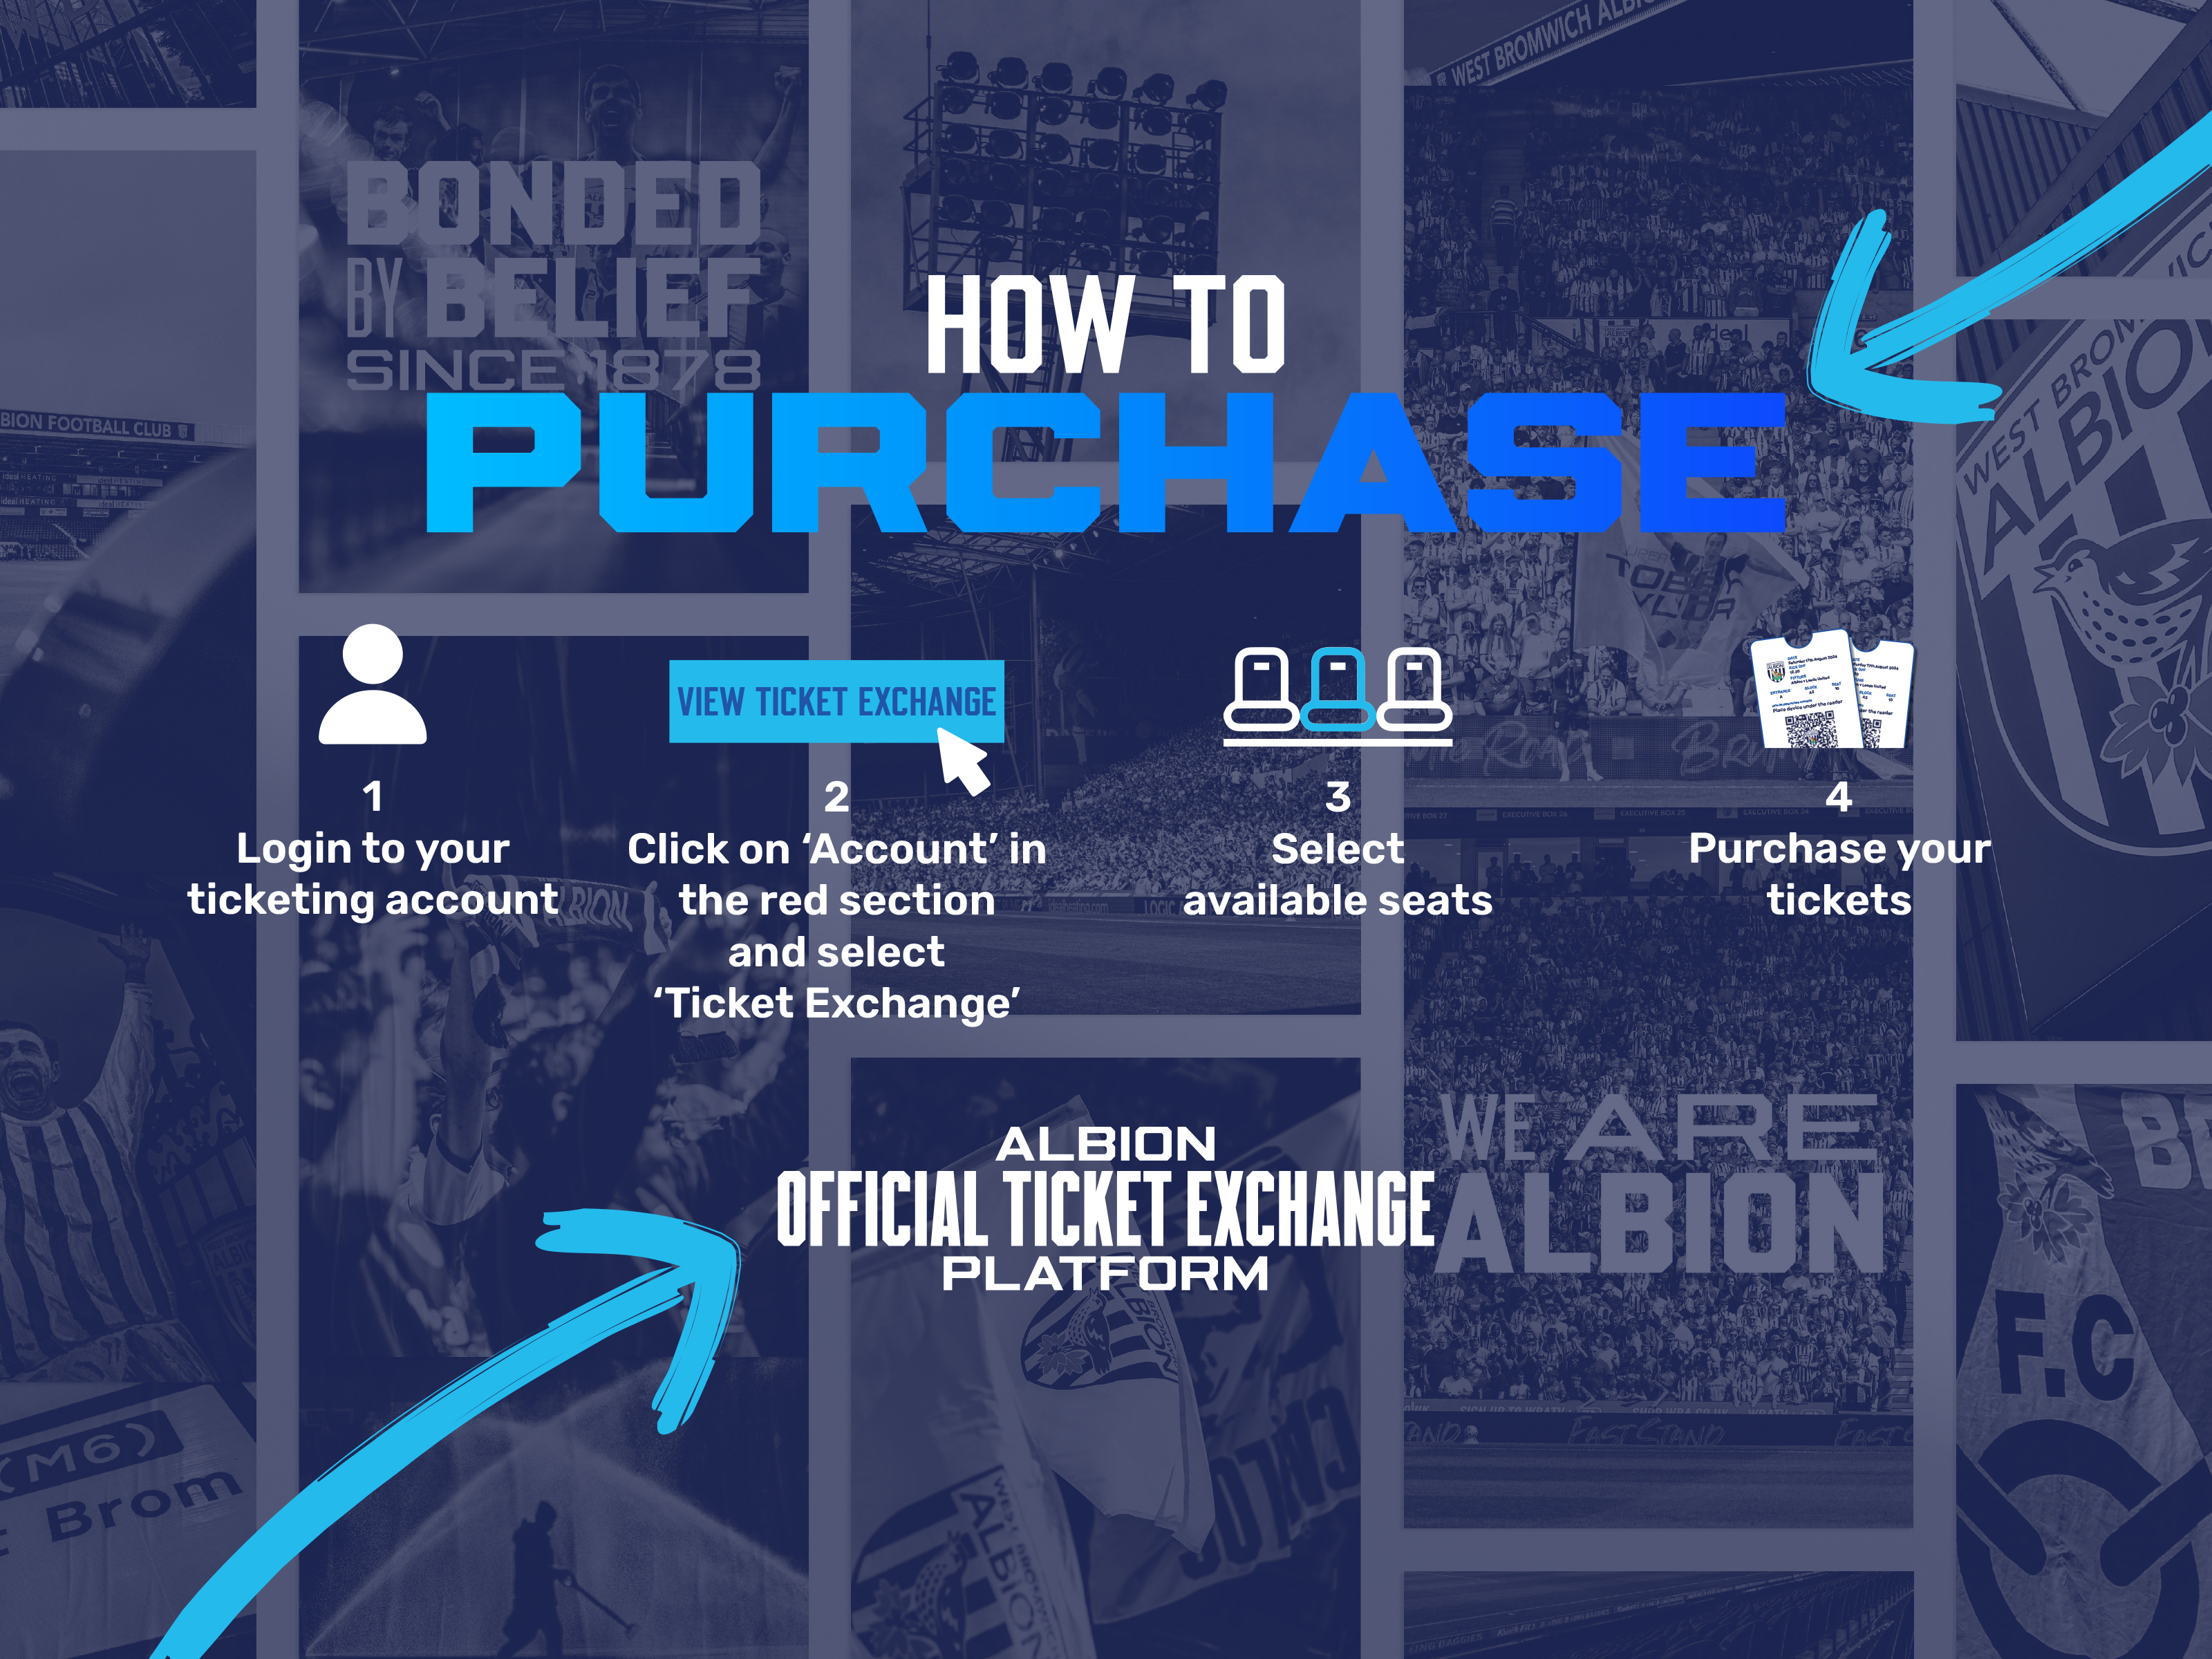 How To Purchase Tickets on The Albion Ticket Exchange